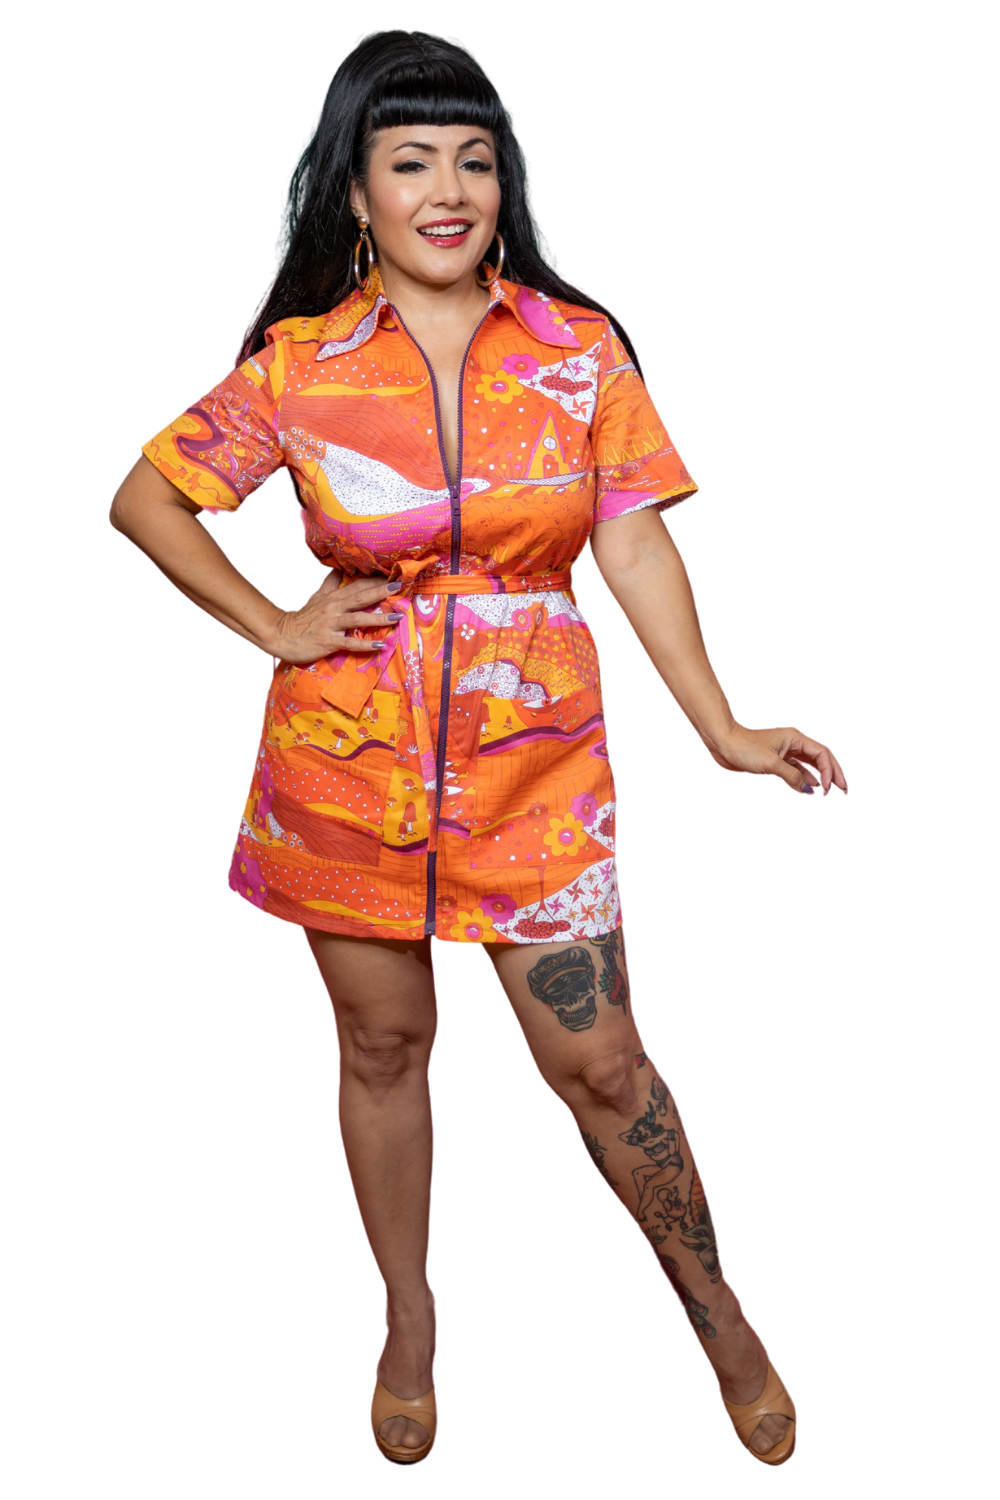 Model wearing pink, orange and yellow dress featuring a landscape graphic